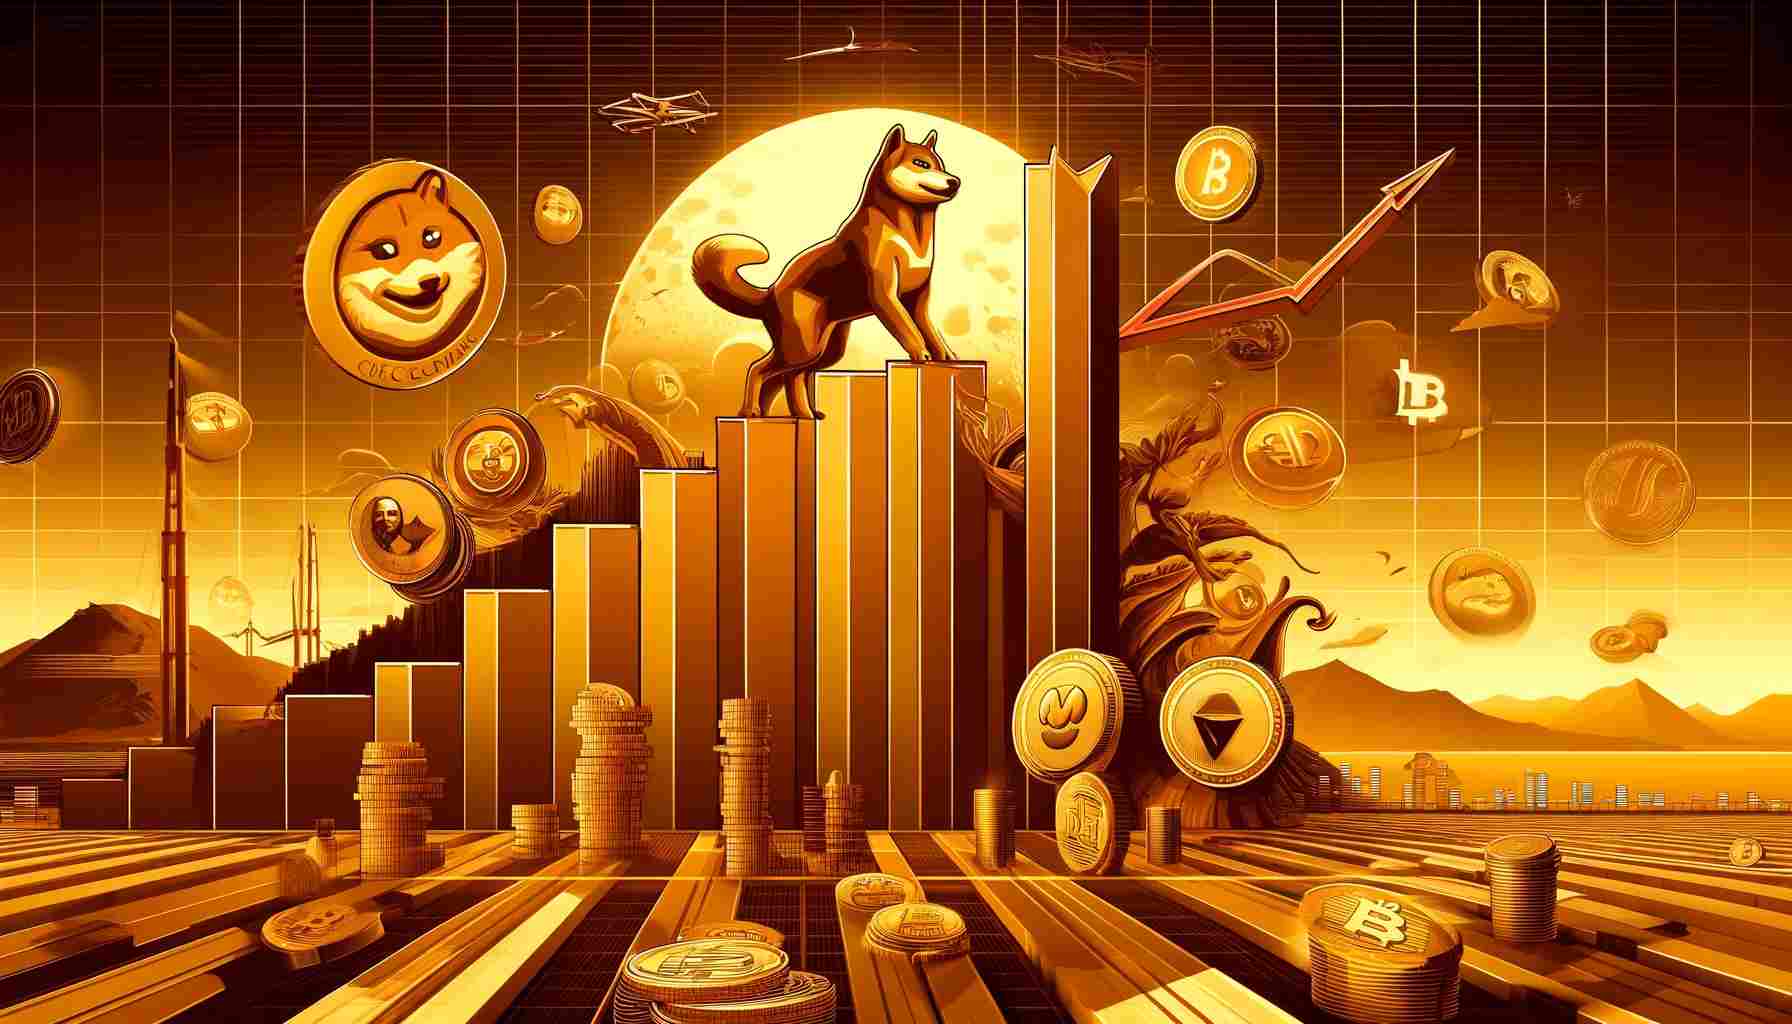 Memecoins top the crypto market in Q1 as “most profitable”